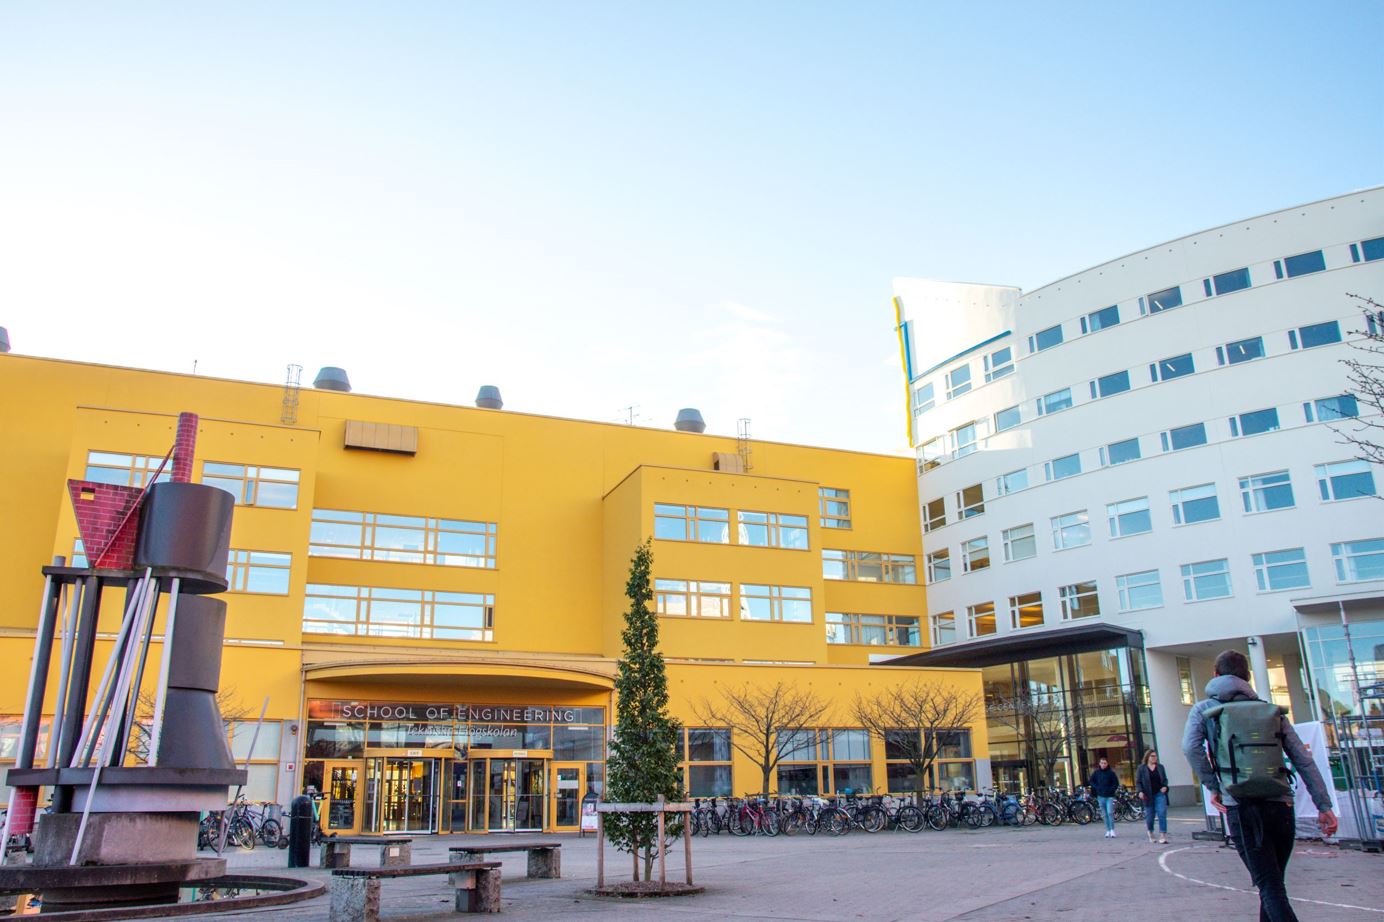 Picture of the School of Engineering at Jönköping University.